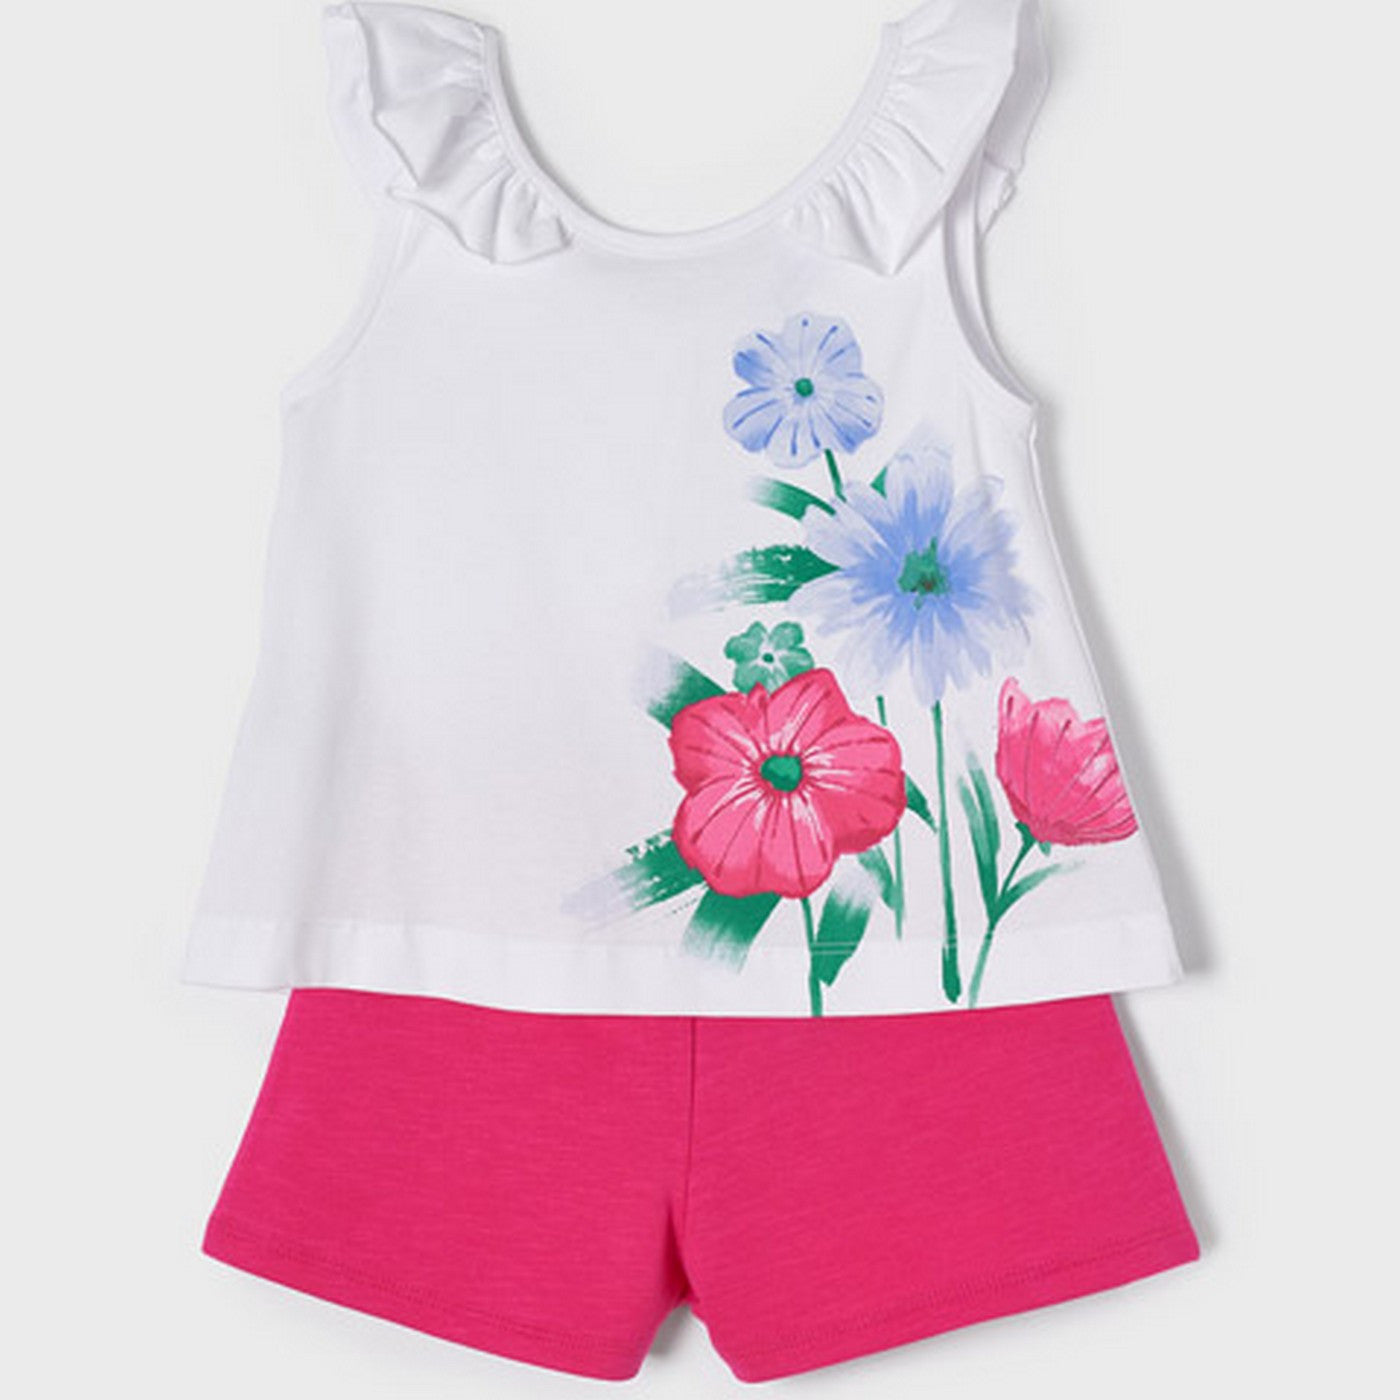 Completo Short E Canotta Fucsia In Cotone Bambina MAYORAL 3283 - MAYORAL - LuxuryKids